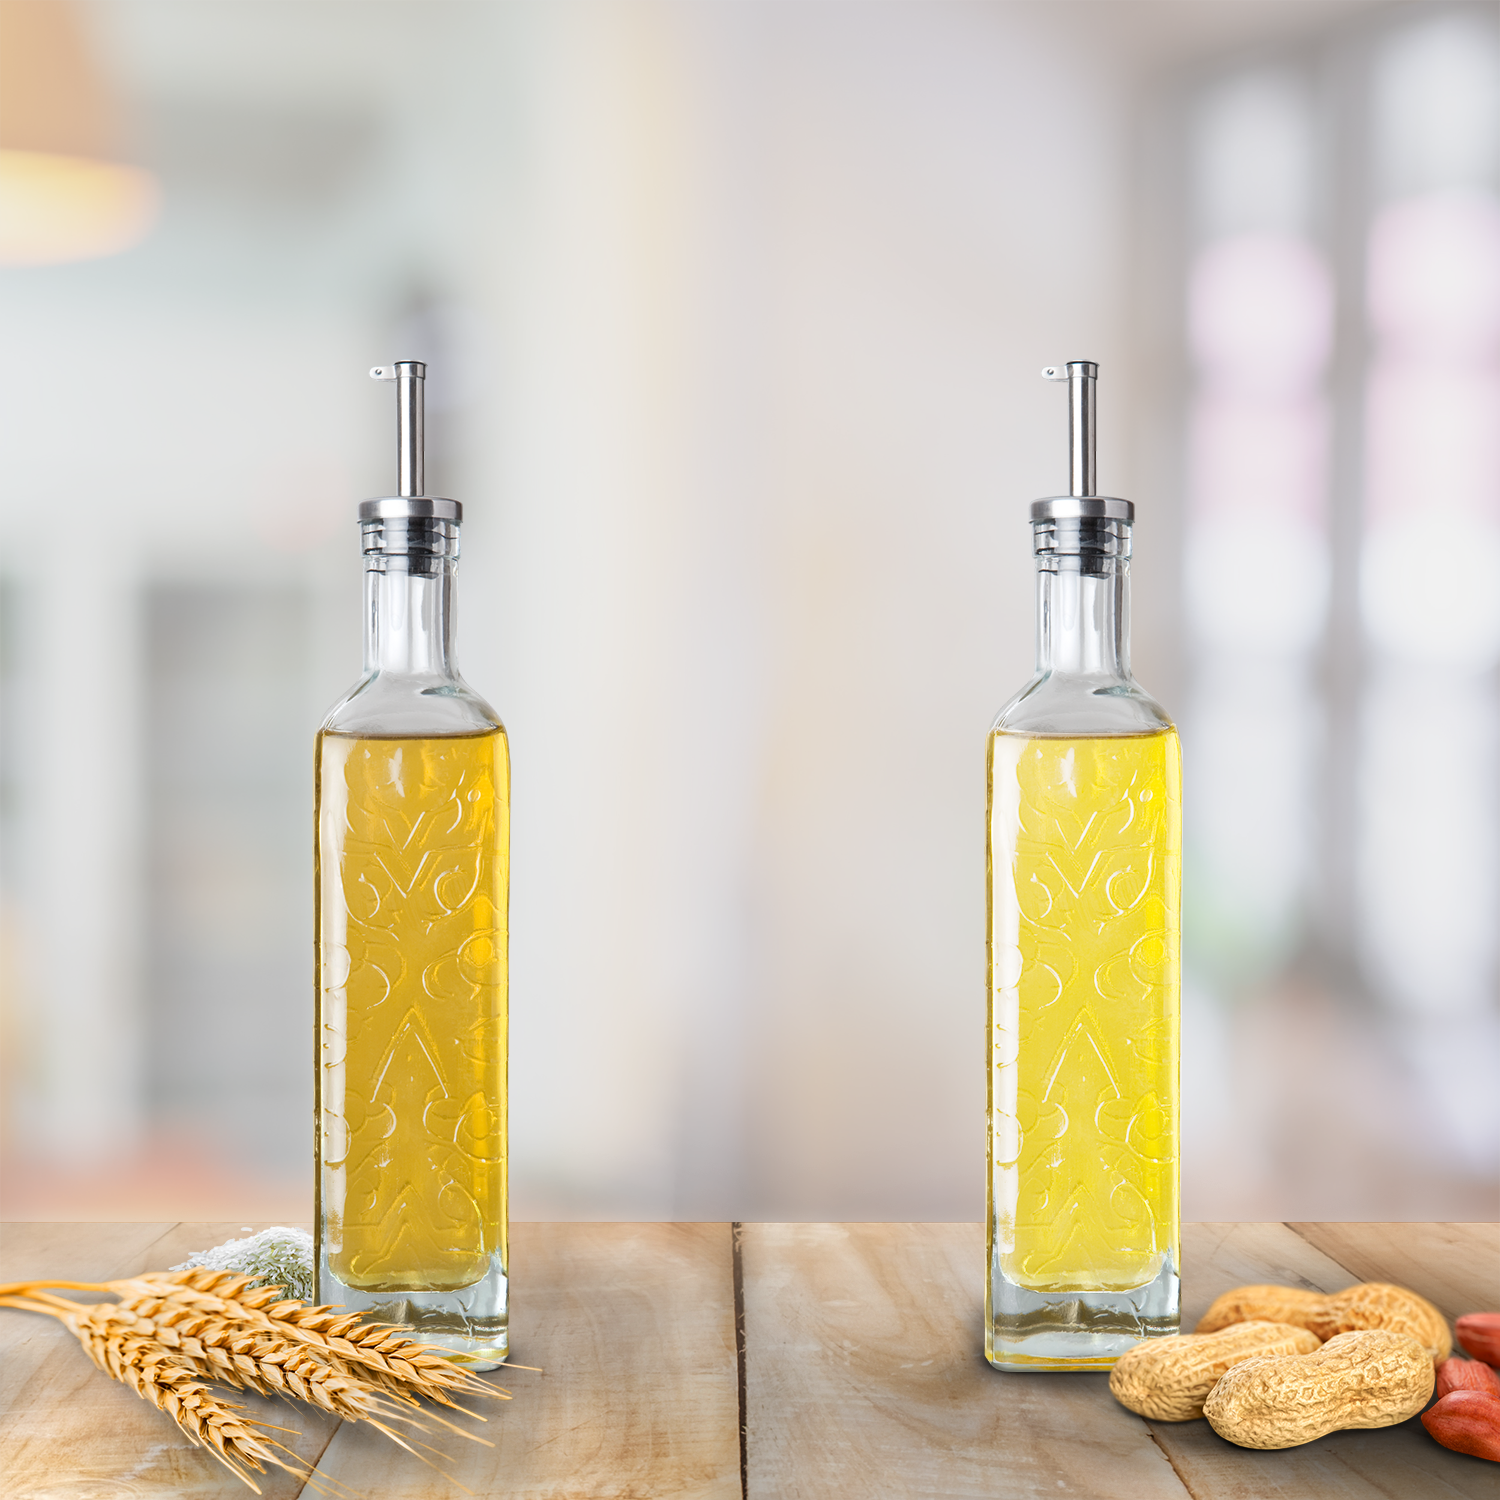 Rice Bran Oil vs Groundnut Oil - Which One to Use?